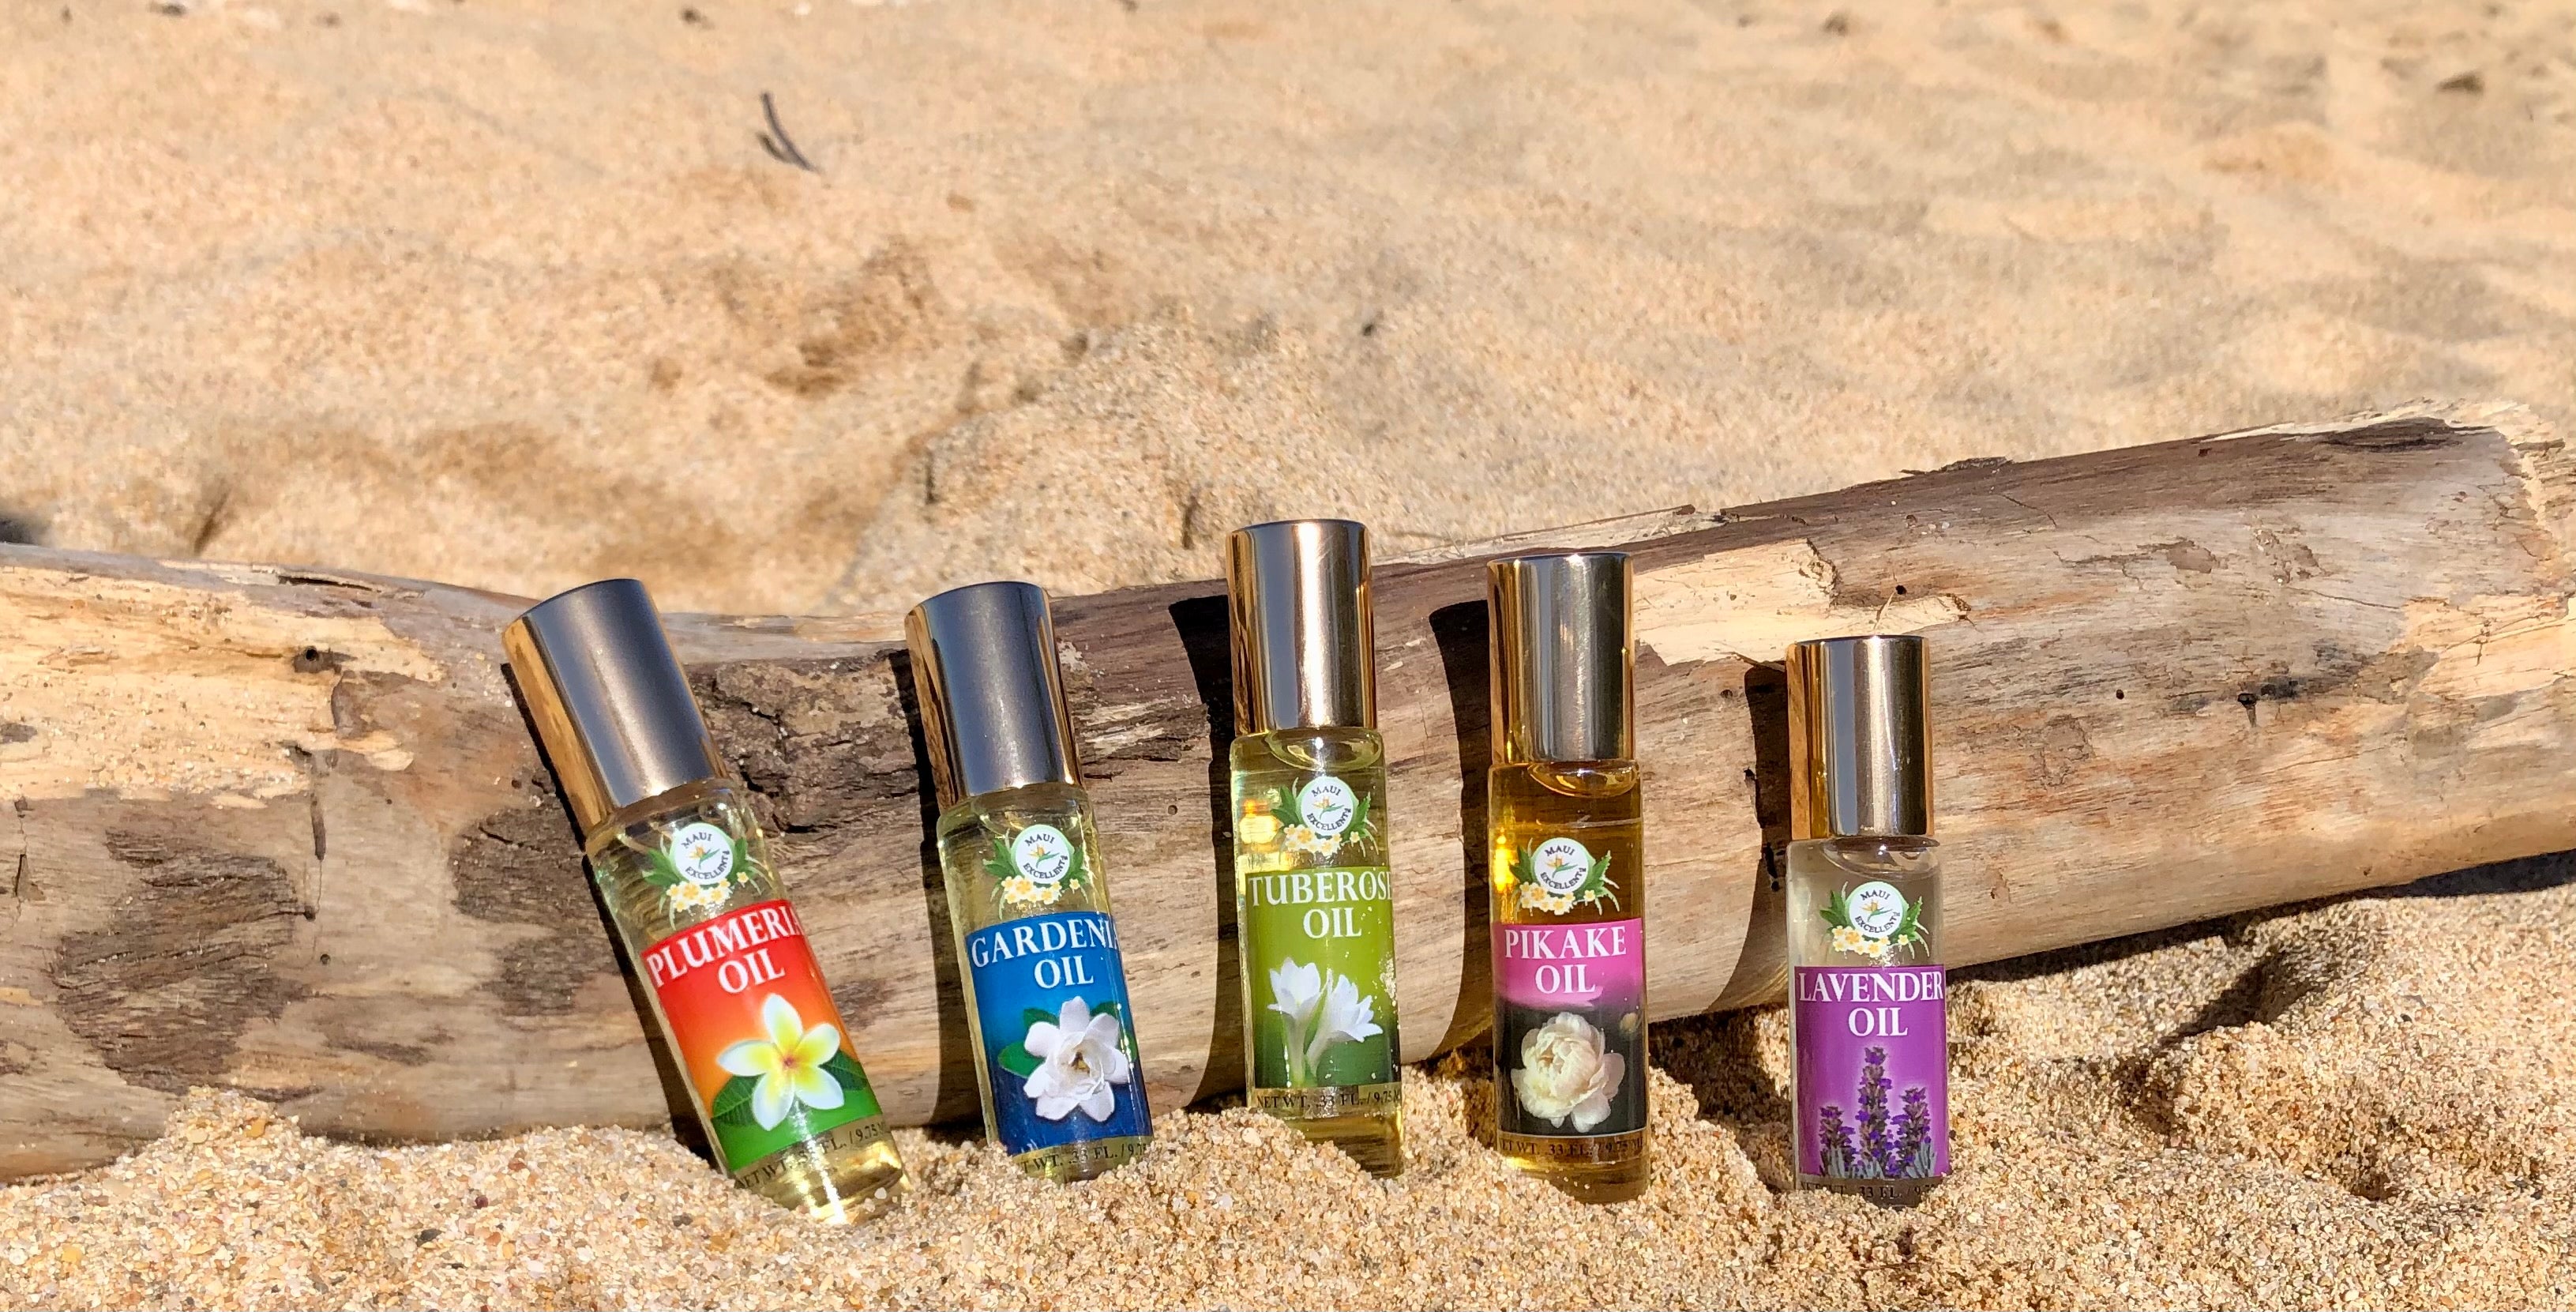 All five Maui Excellent Hawaiian Floral Essential Oil Roll-On bottles are leaning on a small log on the sand. 